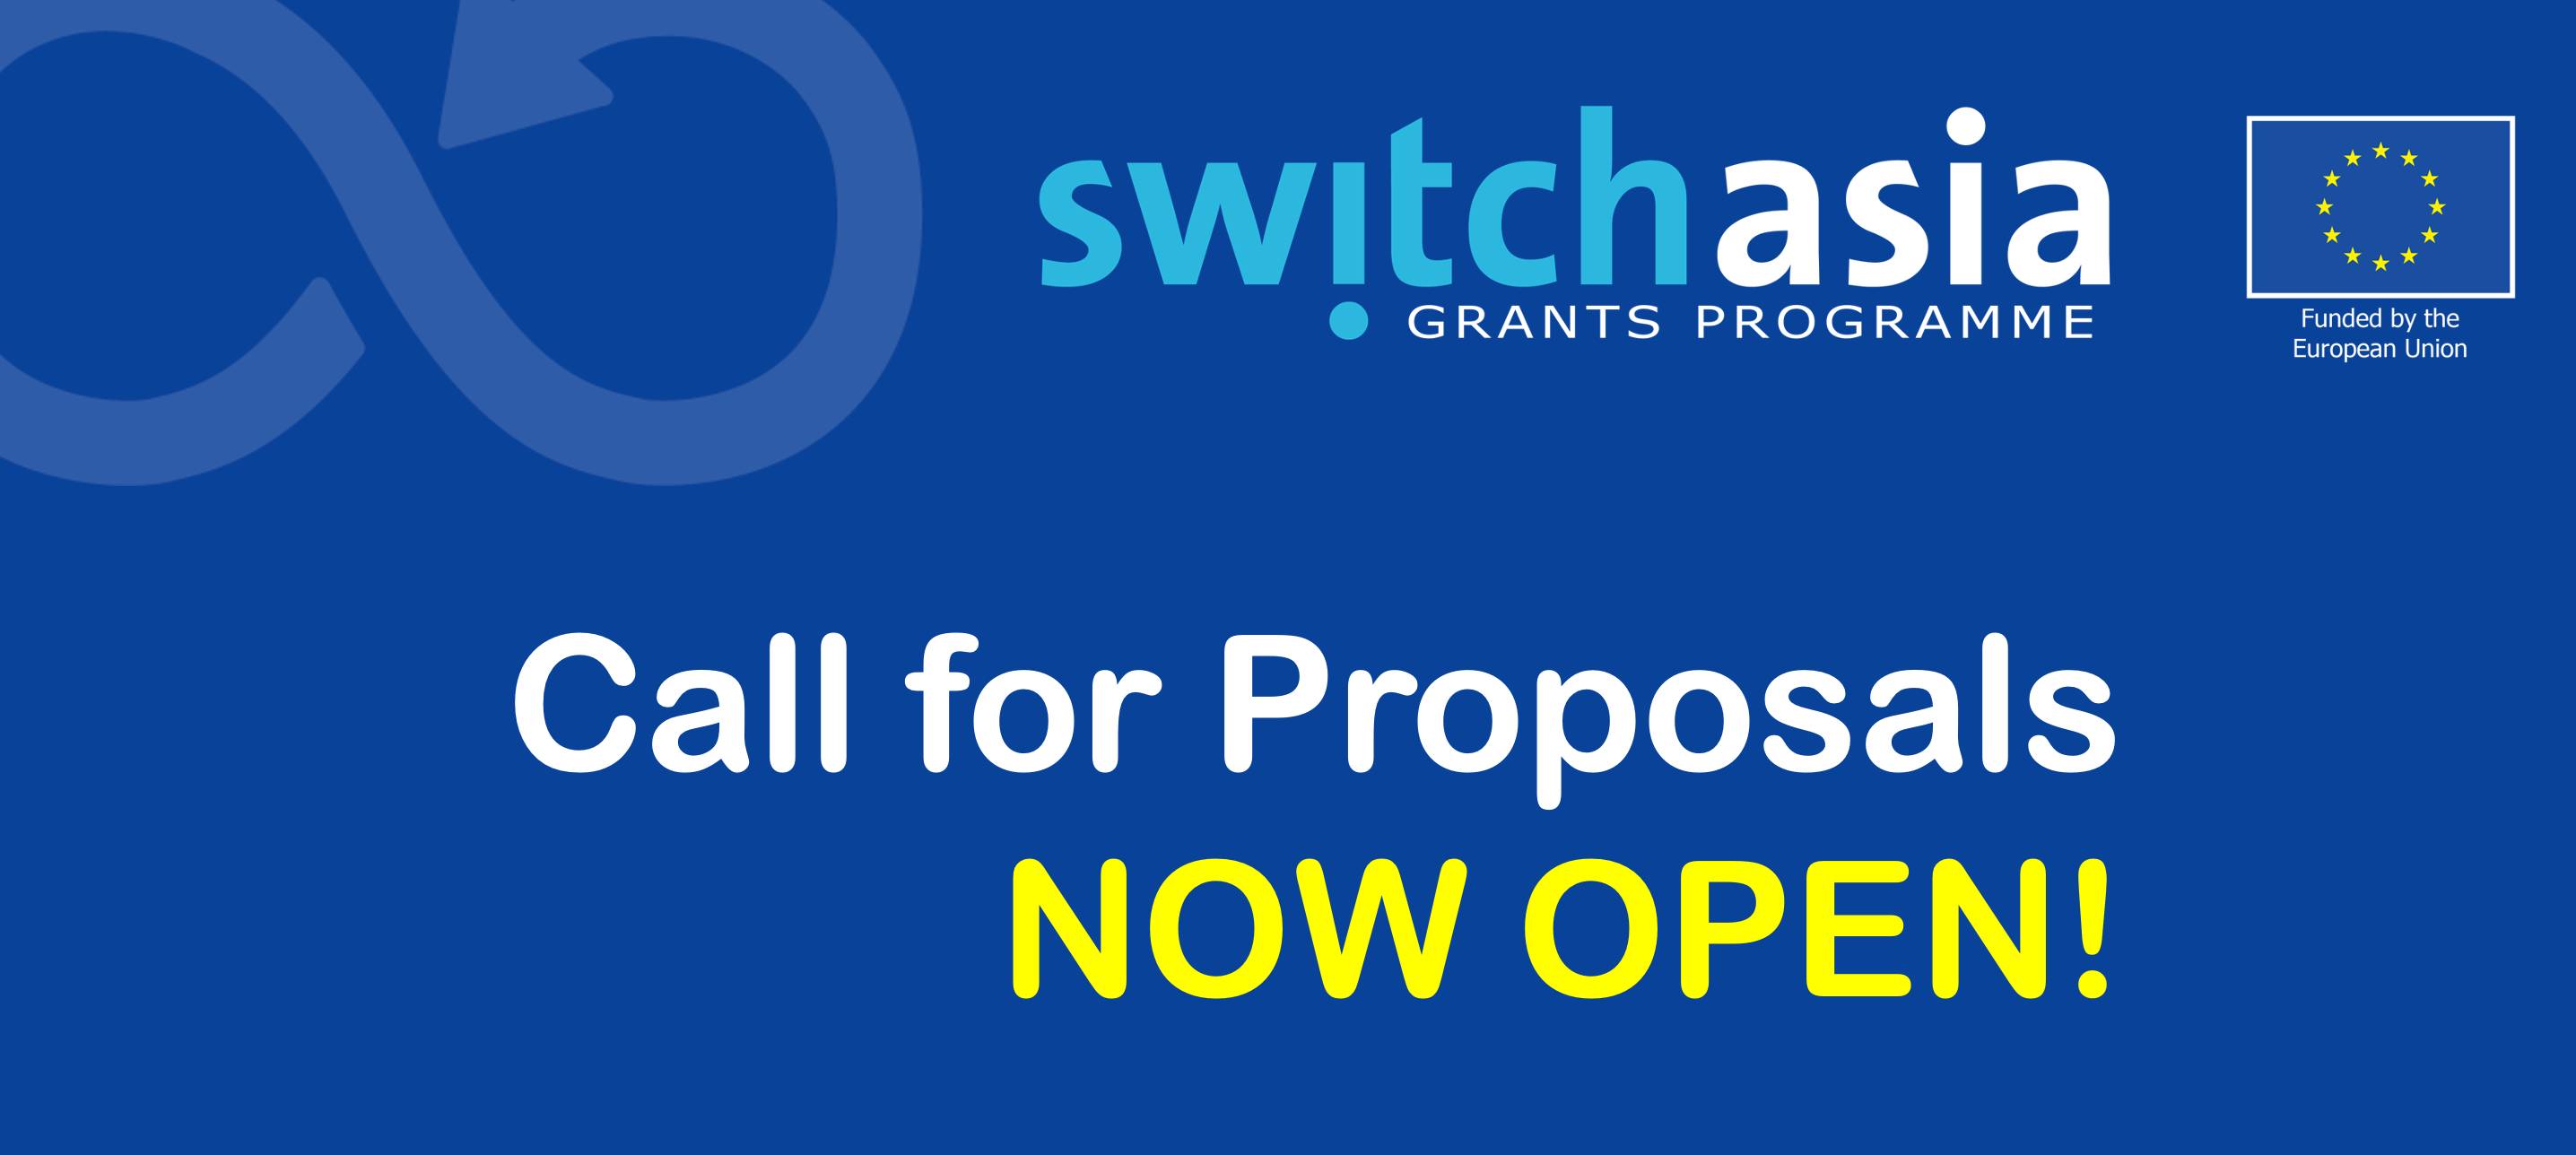 APPLY NOW! NEW Call for Proposals Launched